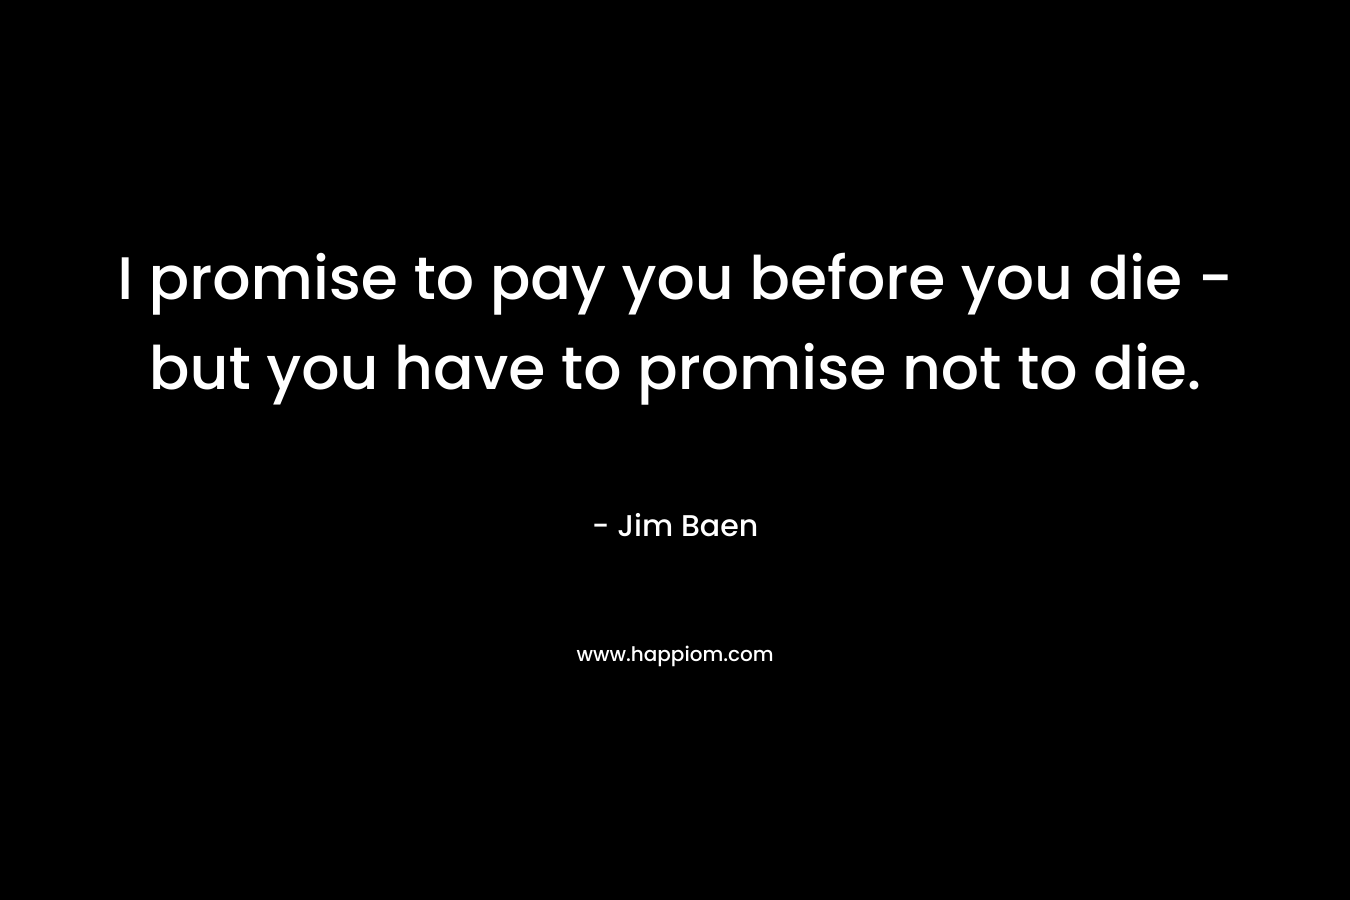 I promise to pay you before you die - but you have to promise not to die.